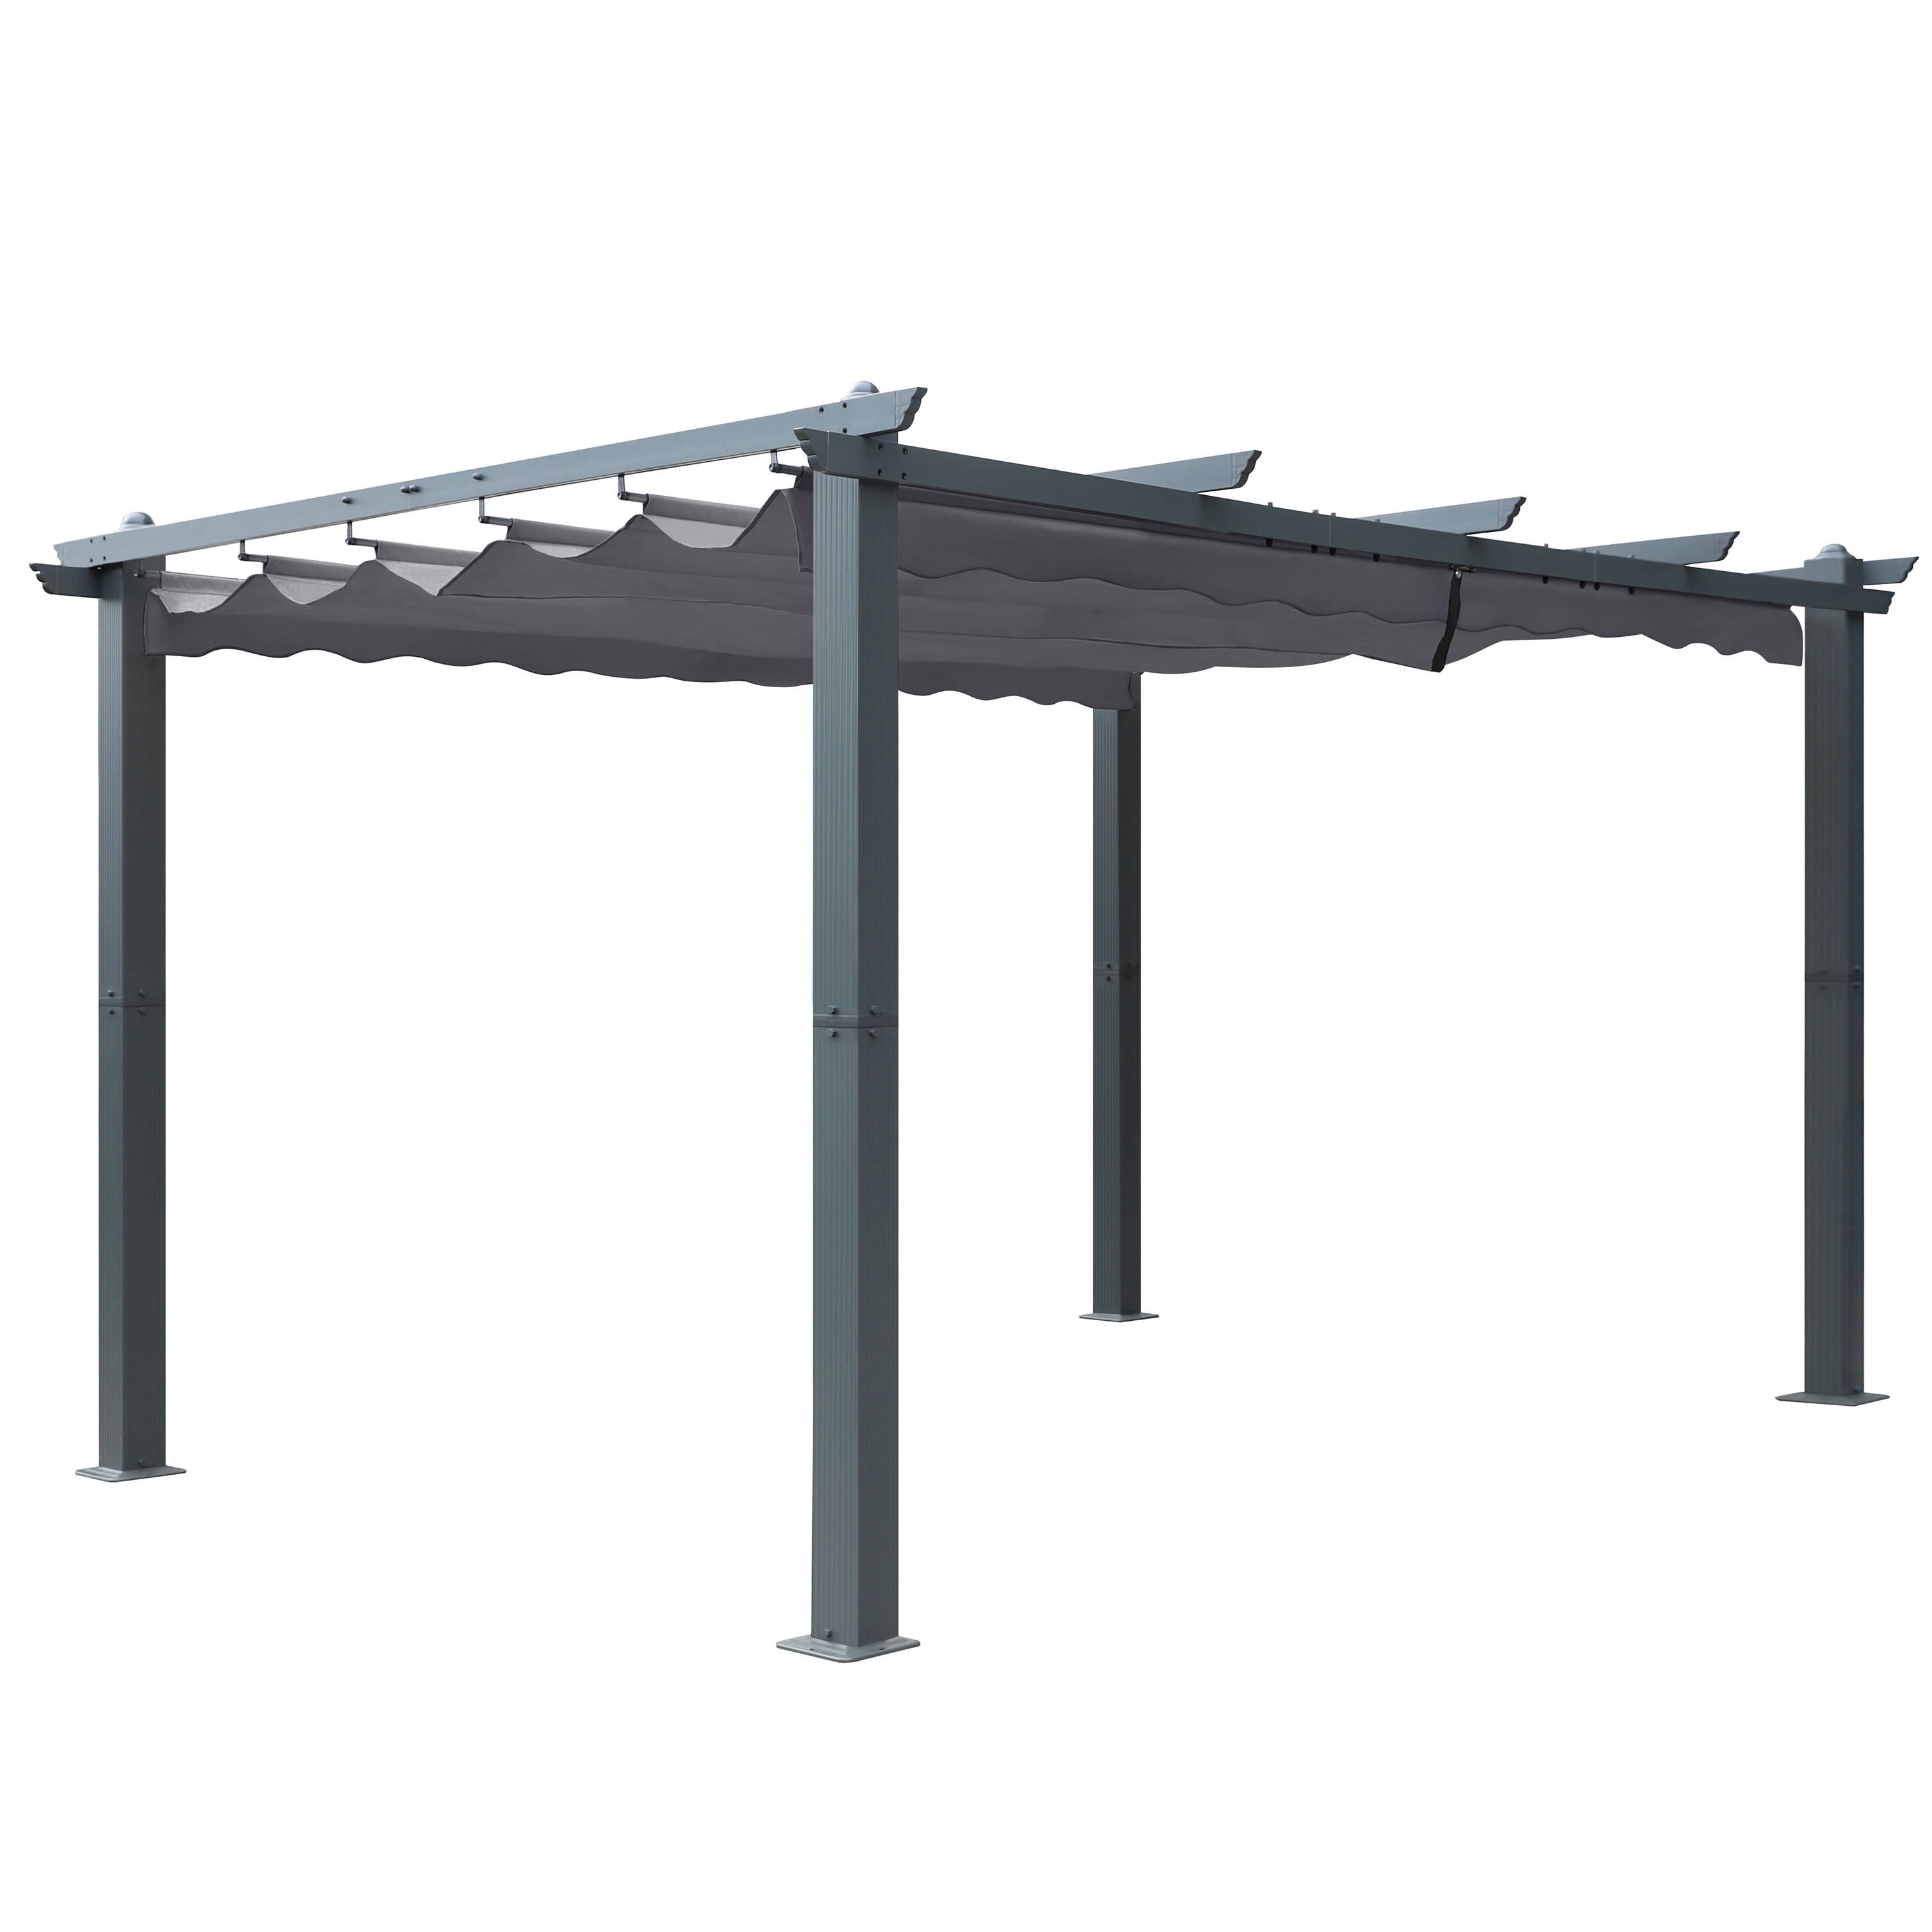 VEIKOUS 10-ft W x 10-ft L x 7-ft 3-in Gray Metal Freestanding Pergola with Canopy